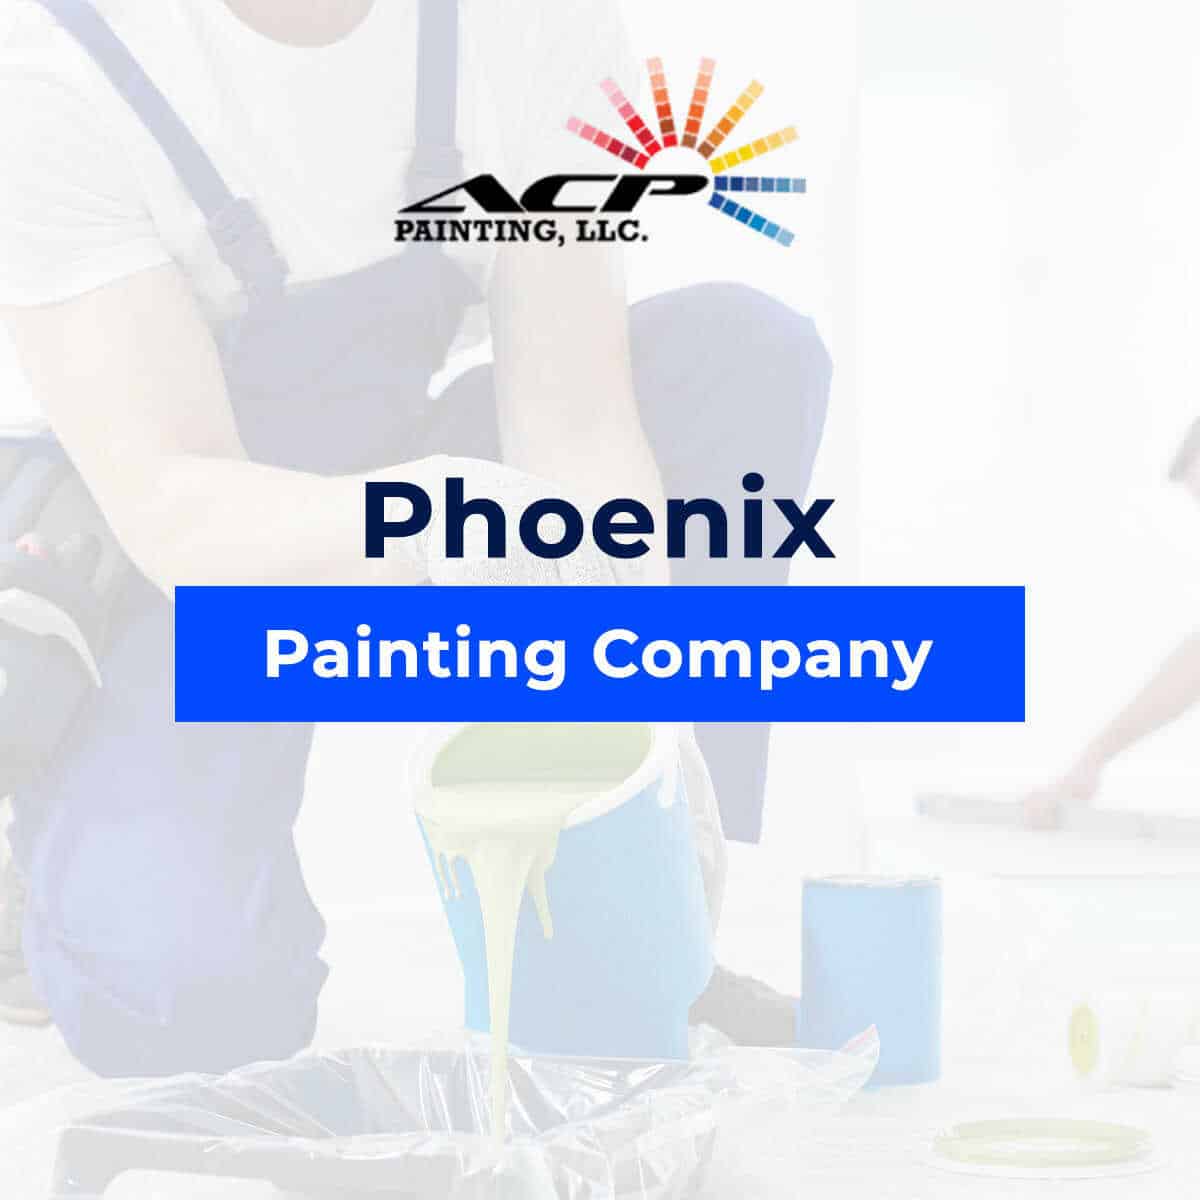 Phoenix Painting Company Featured Image 